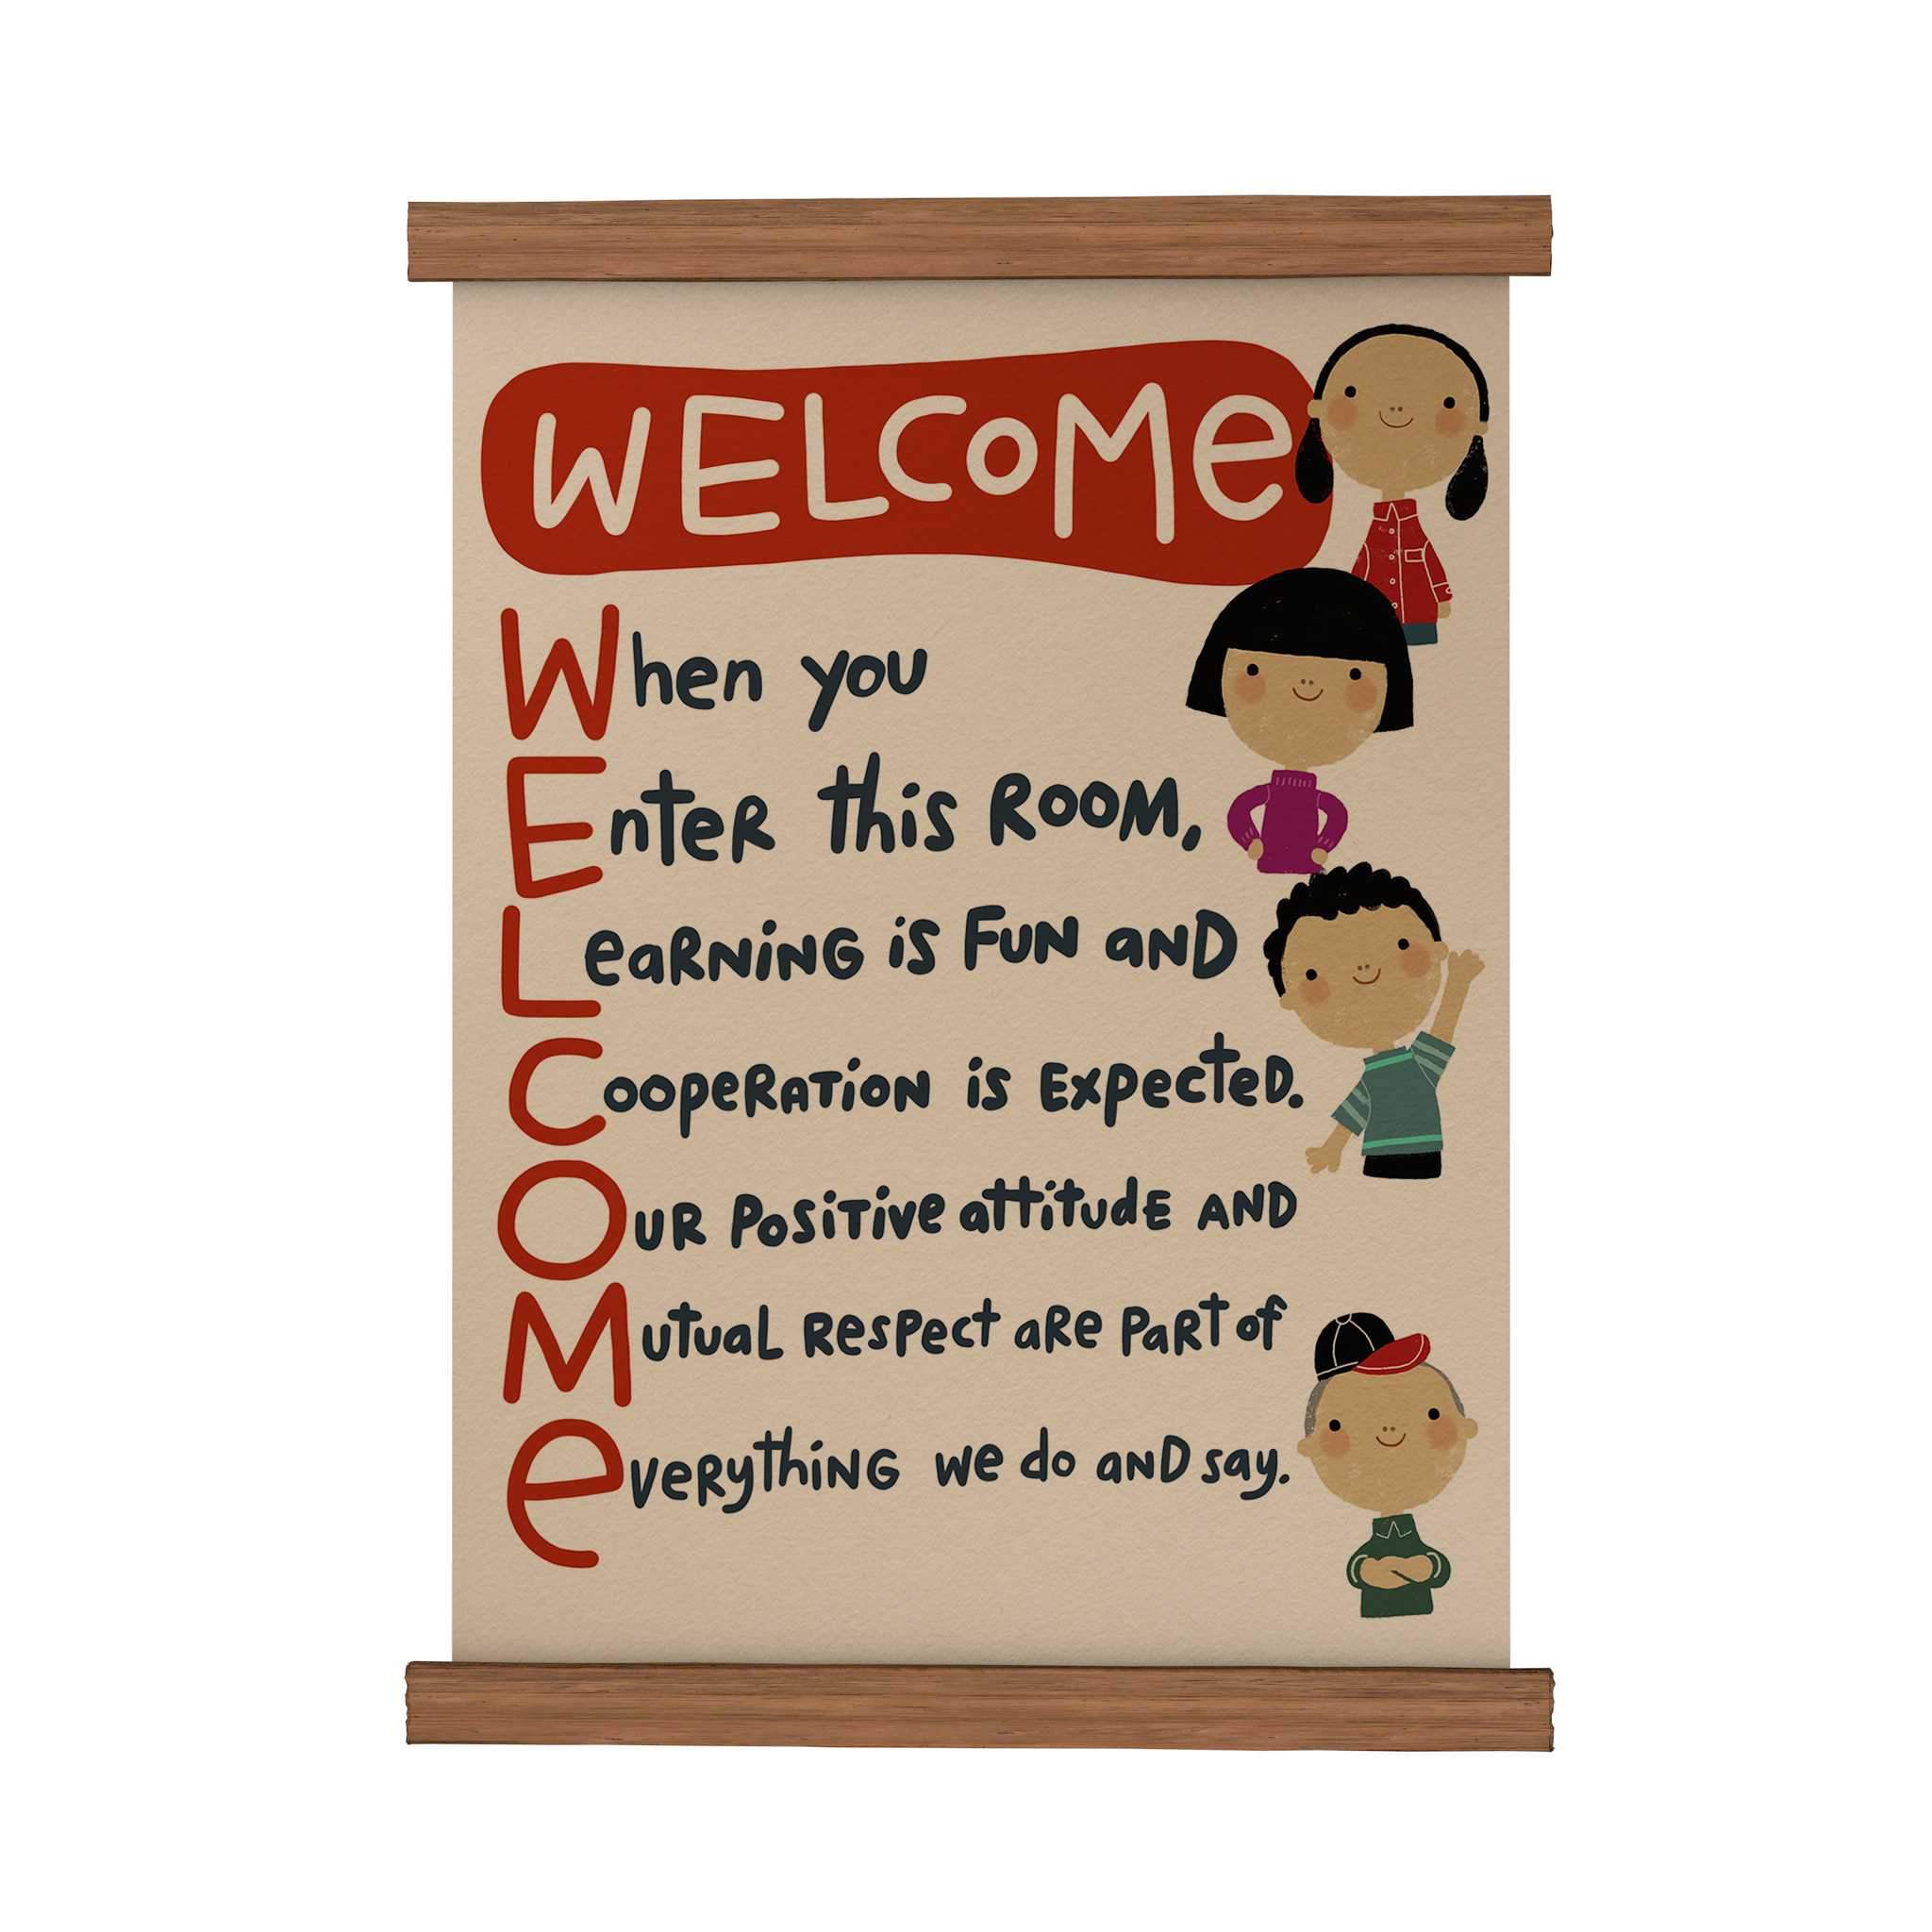 Welcome Scroll Poster